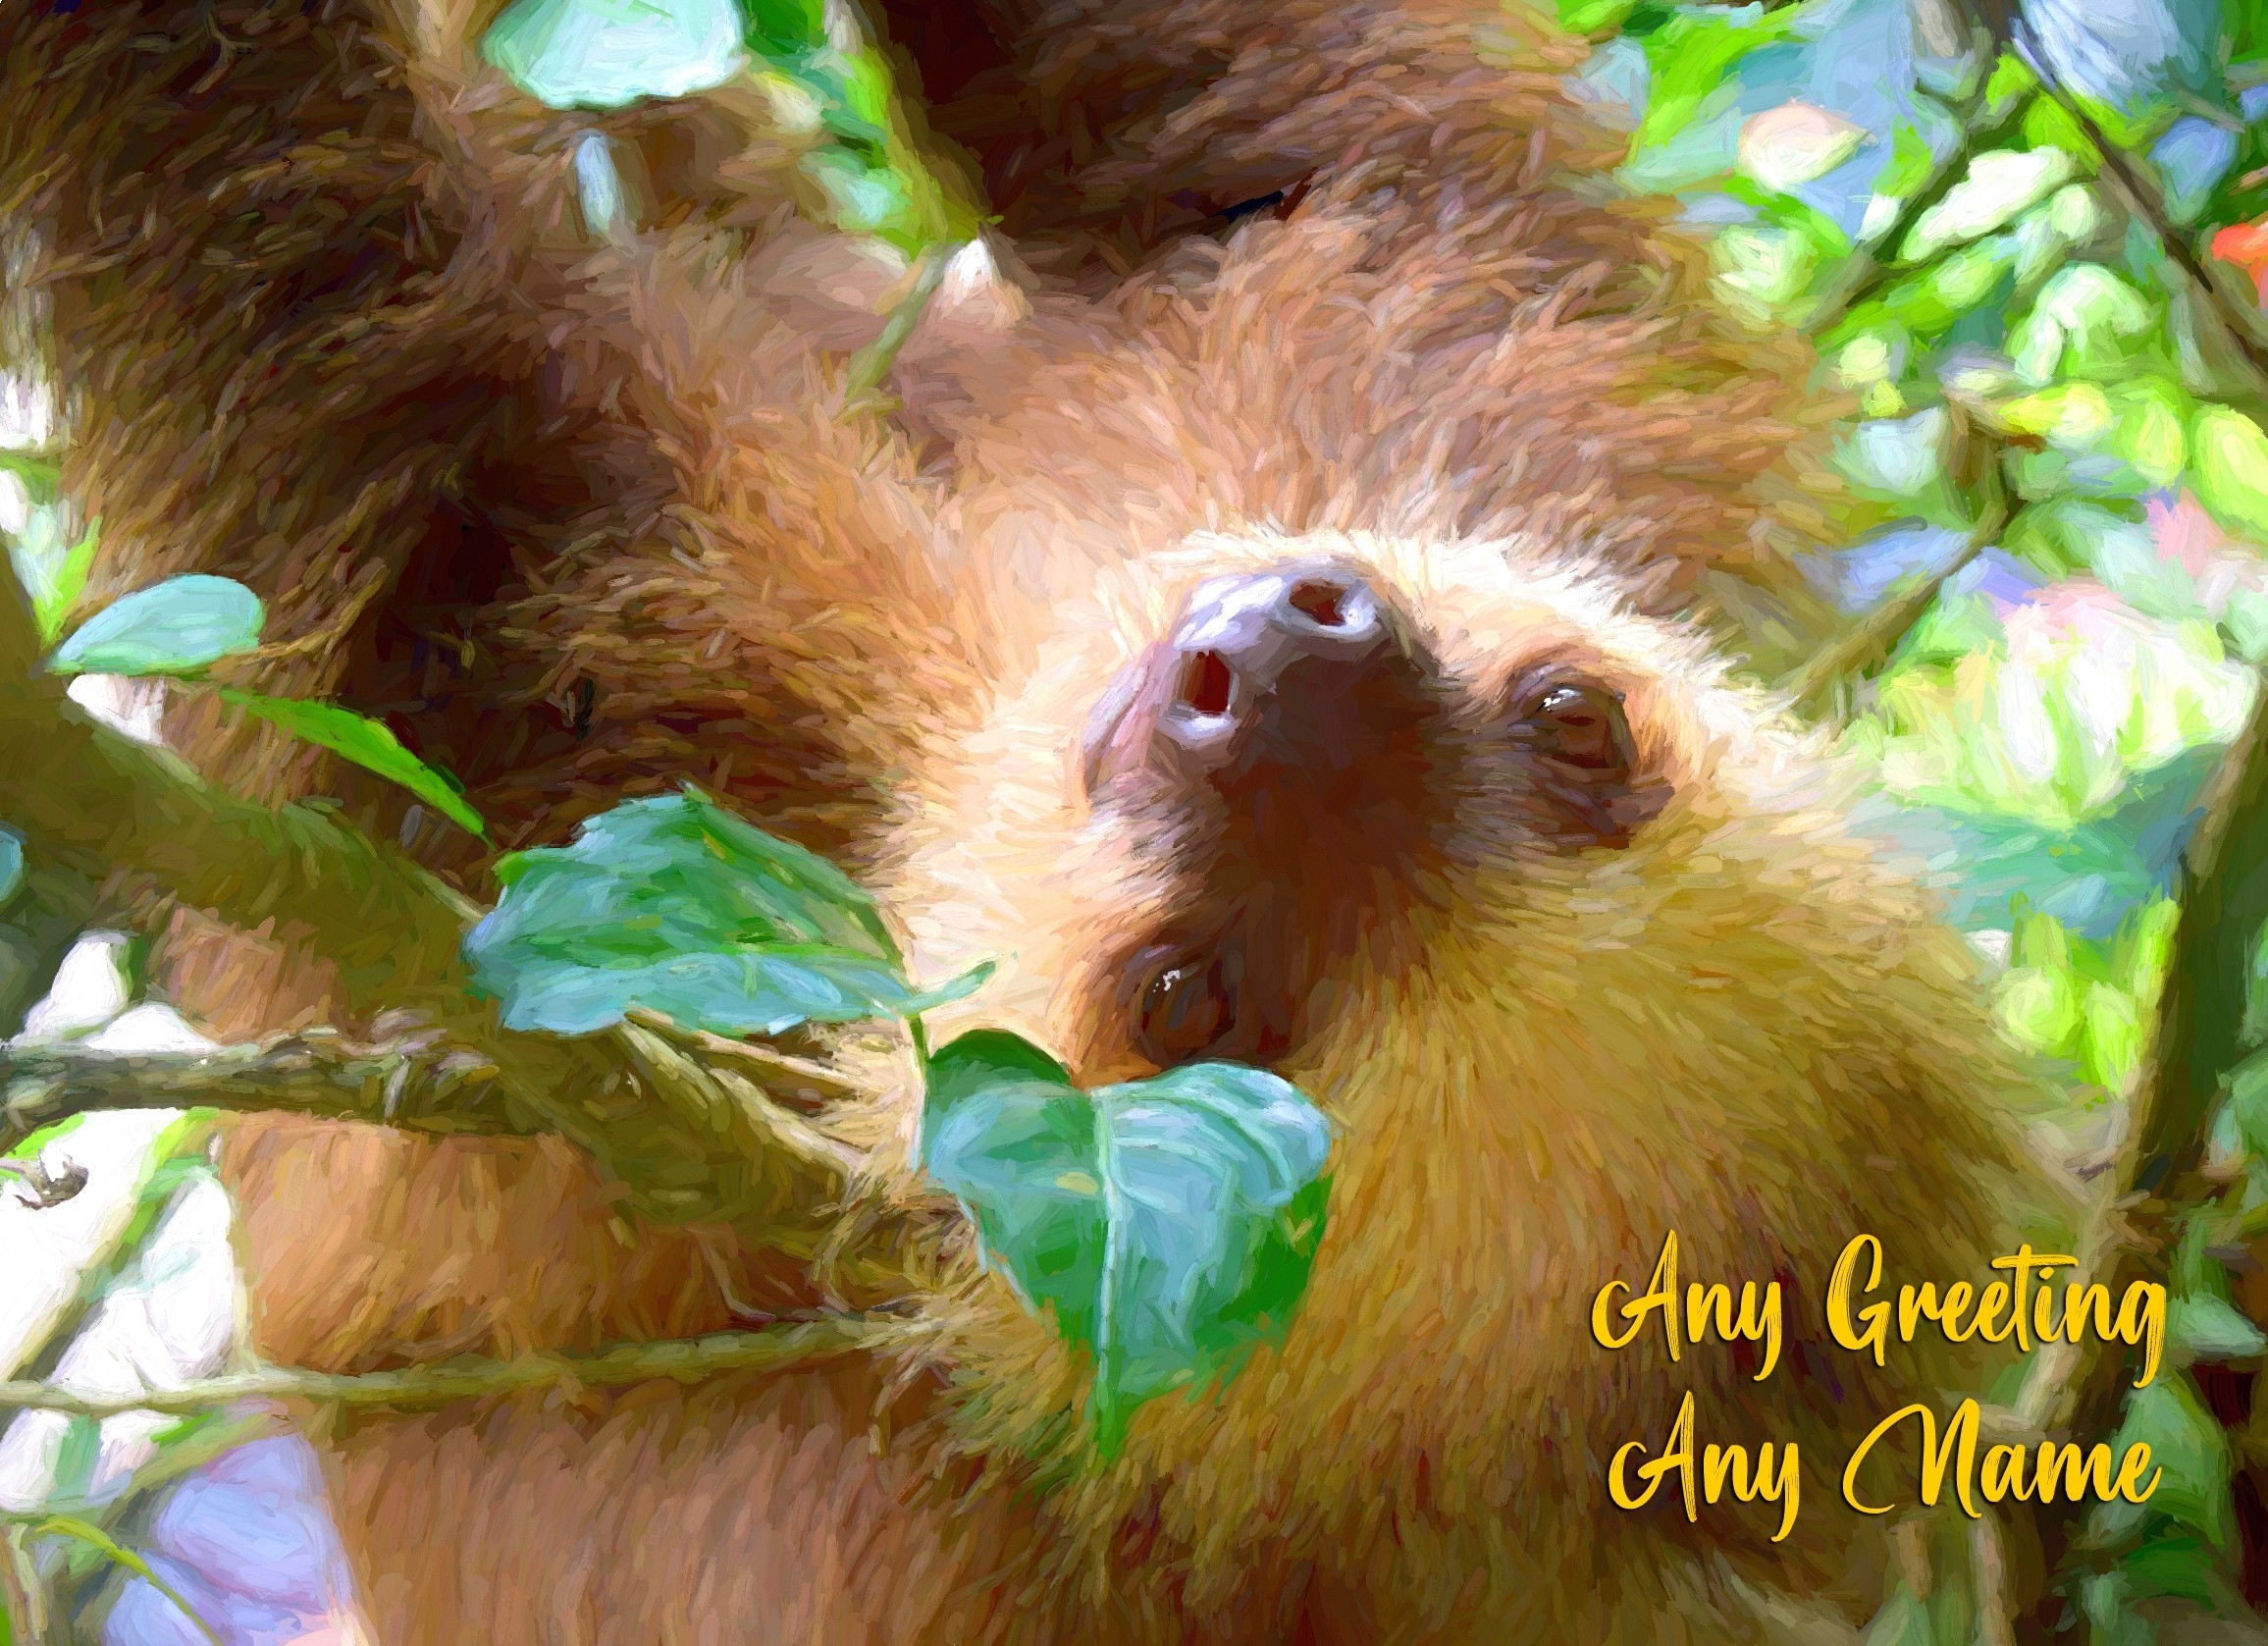 Personalised Sloth Art Greeting Card (Birthday, Christmas, Any Occasion)